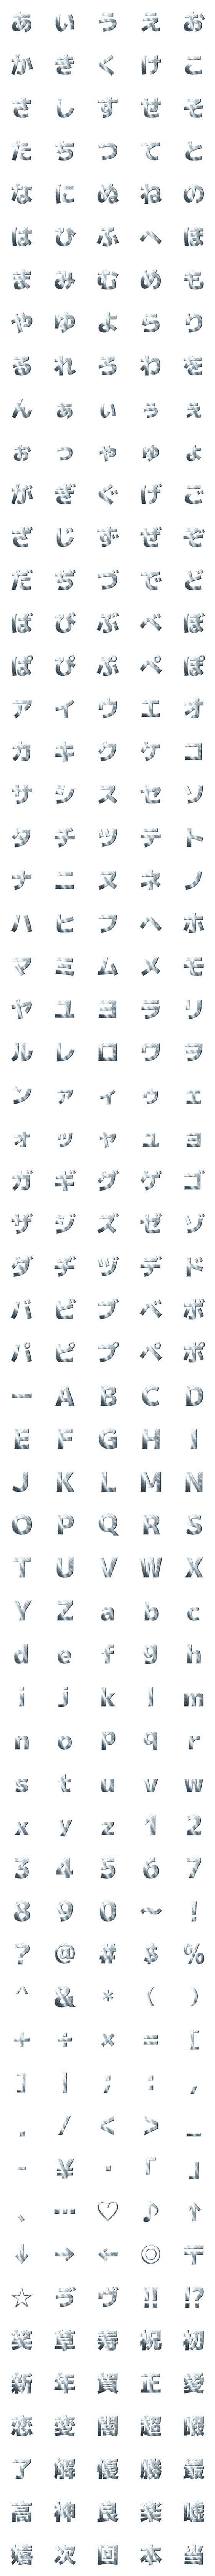 [LINE絵文字]鉄風文字 -ゴシック体-の画像一覧